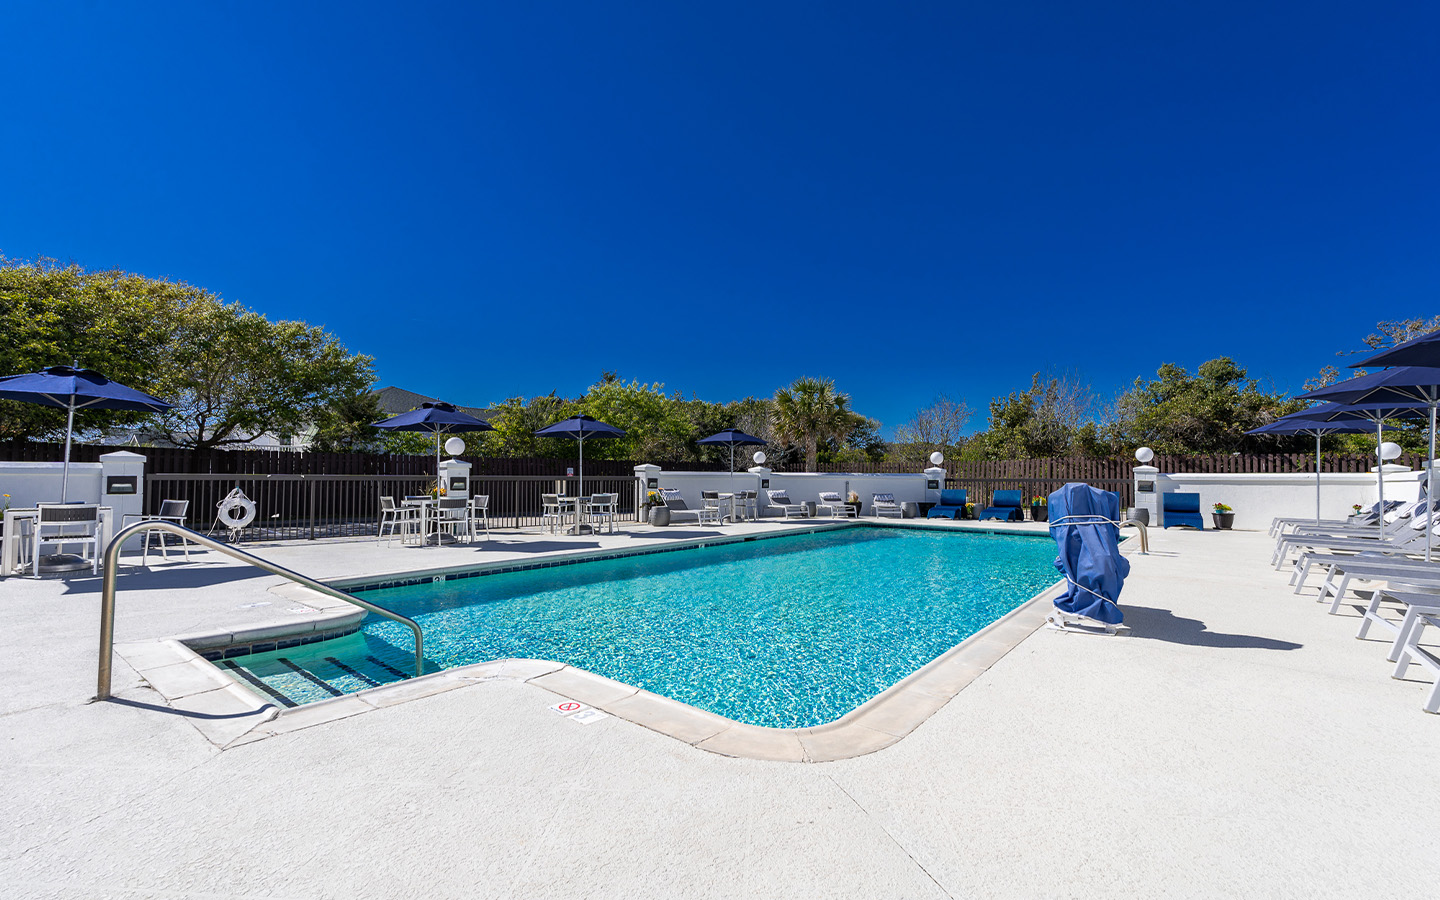 Soak Up The Sun In Our Sparkling Outdoor Pool